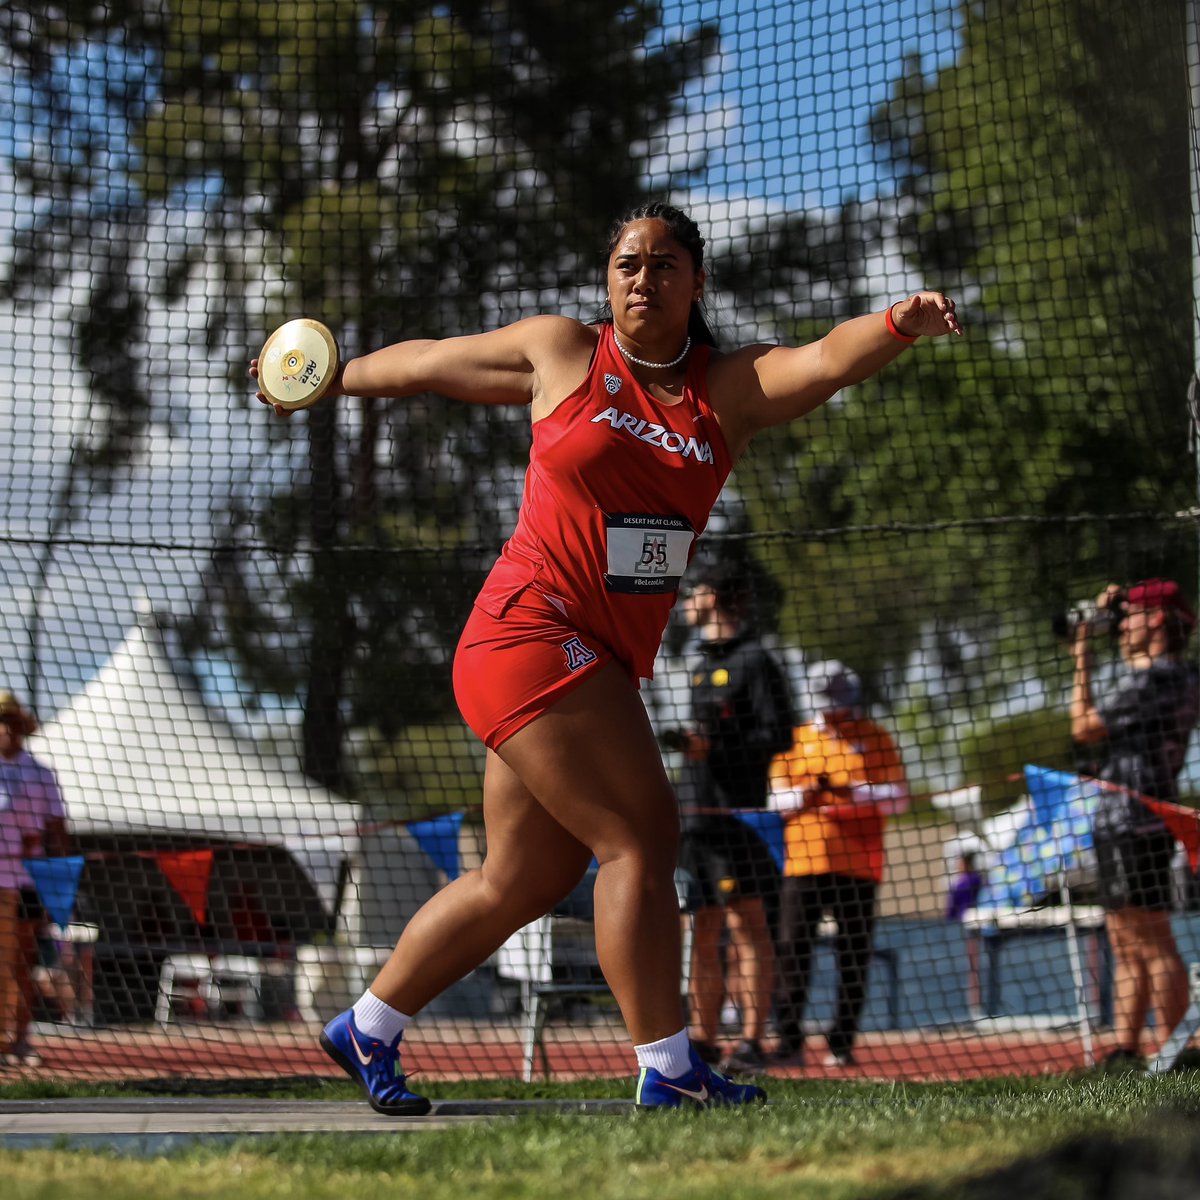 𝐃𝐈𝐒𝐂𝐔𝐒 𝐅𝐈𝐍𝐀𝐋

Tapenisa Havea places sixth in the women’s discus with a throw of 166-11 (50.88m)!

#BearDown | #BeLezoLike